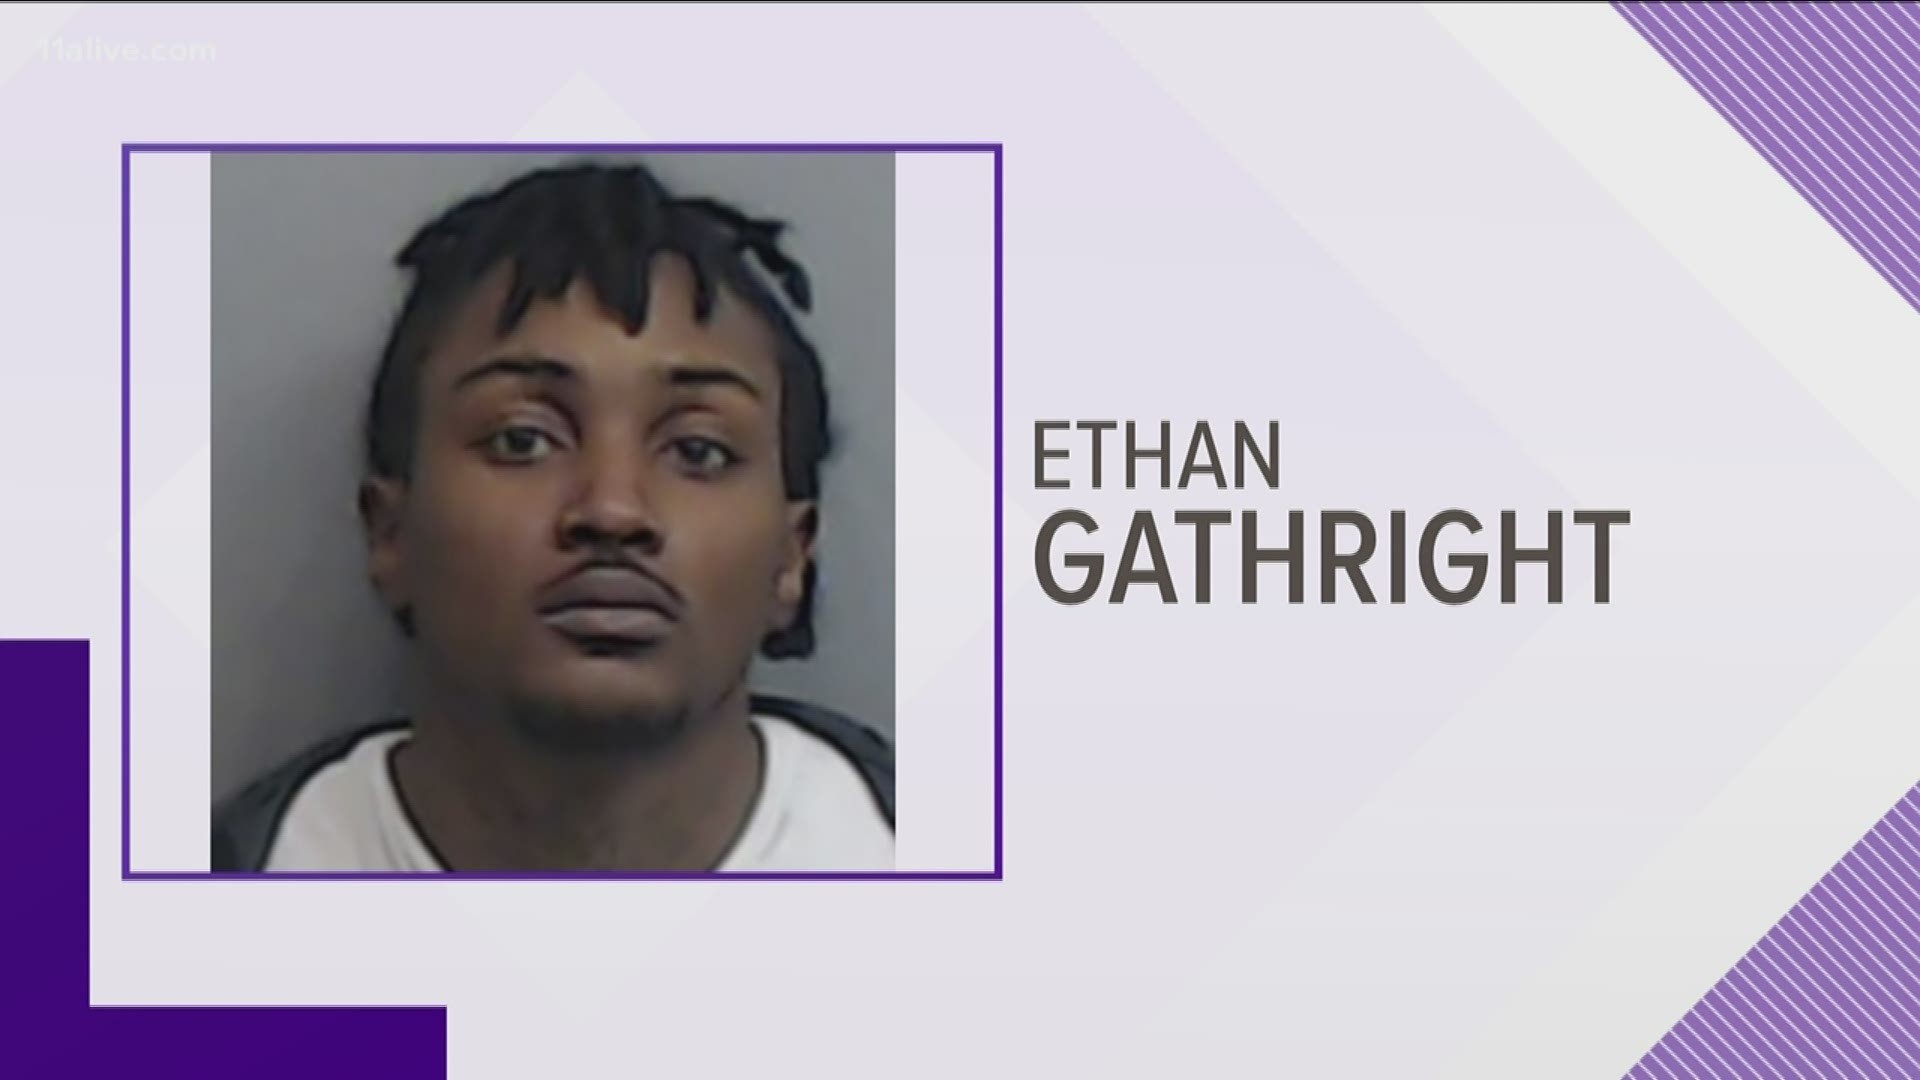 Ethan Gathright has been charged with felony murder.